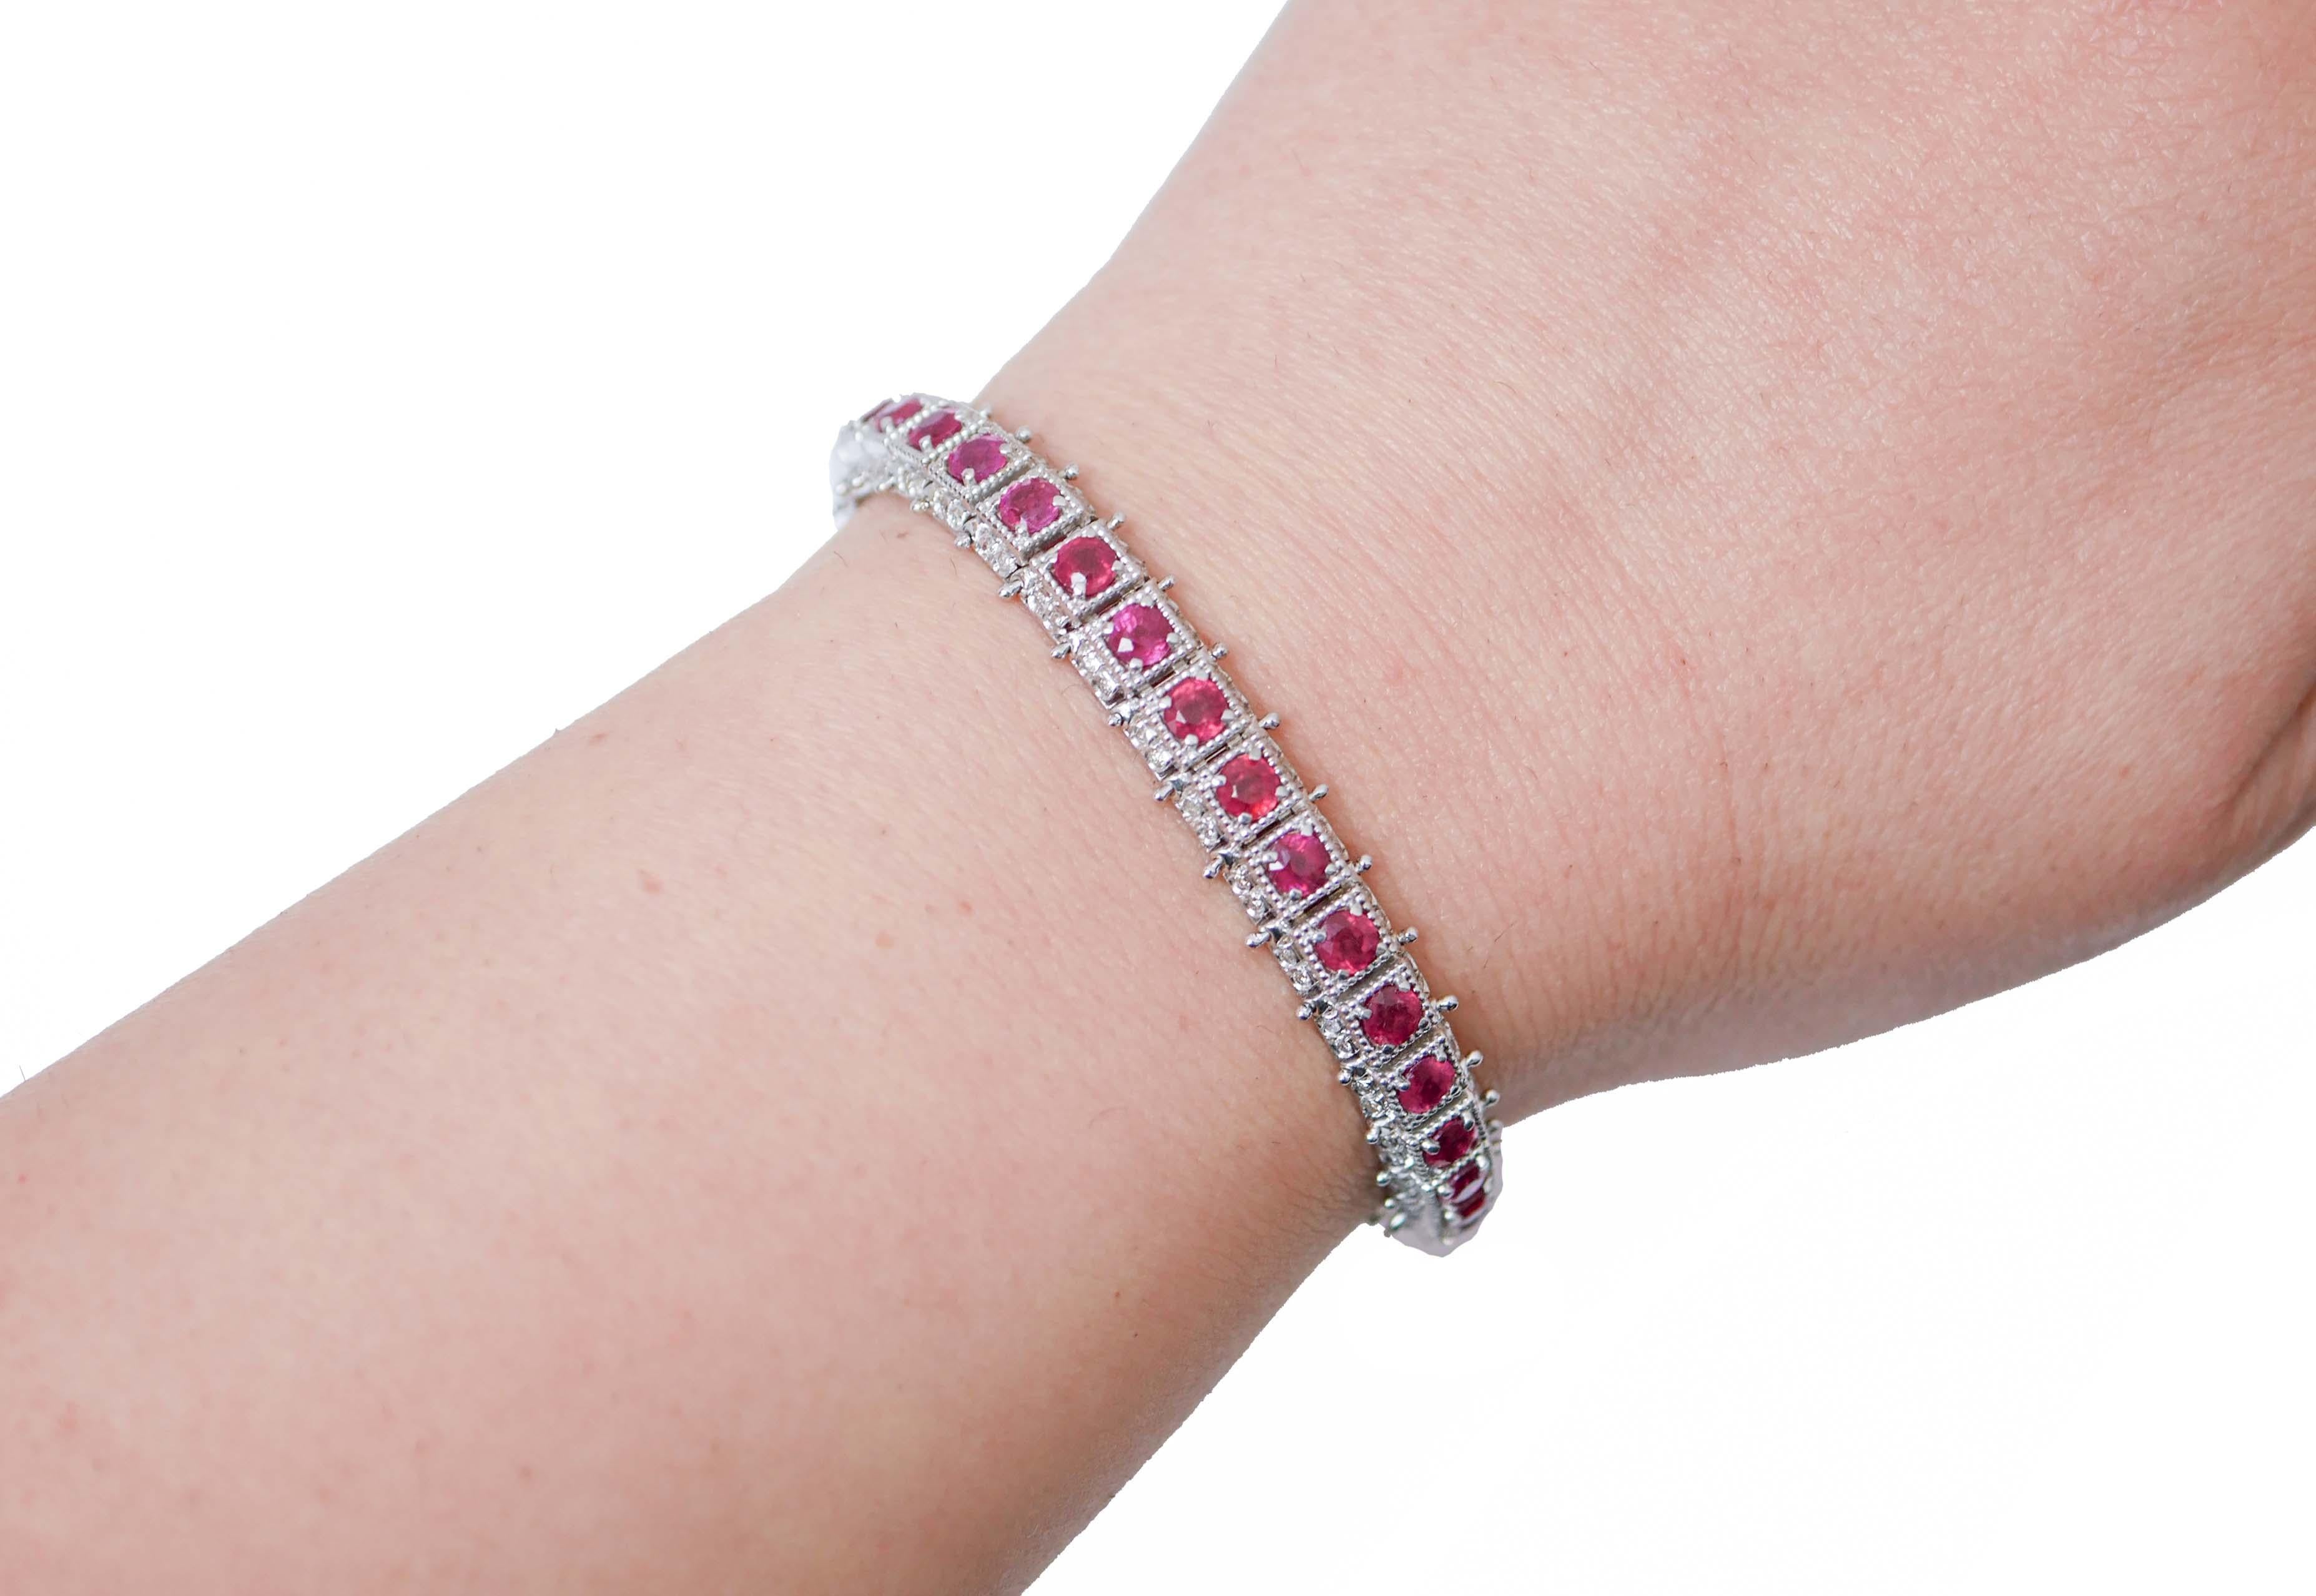 Women's Rubies, Diamonds, Rose Gold and Silver Bracelet. For Sale